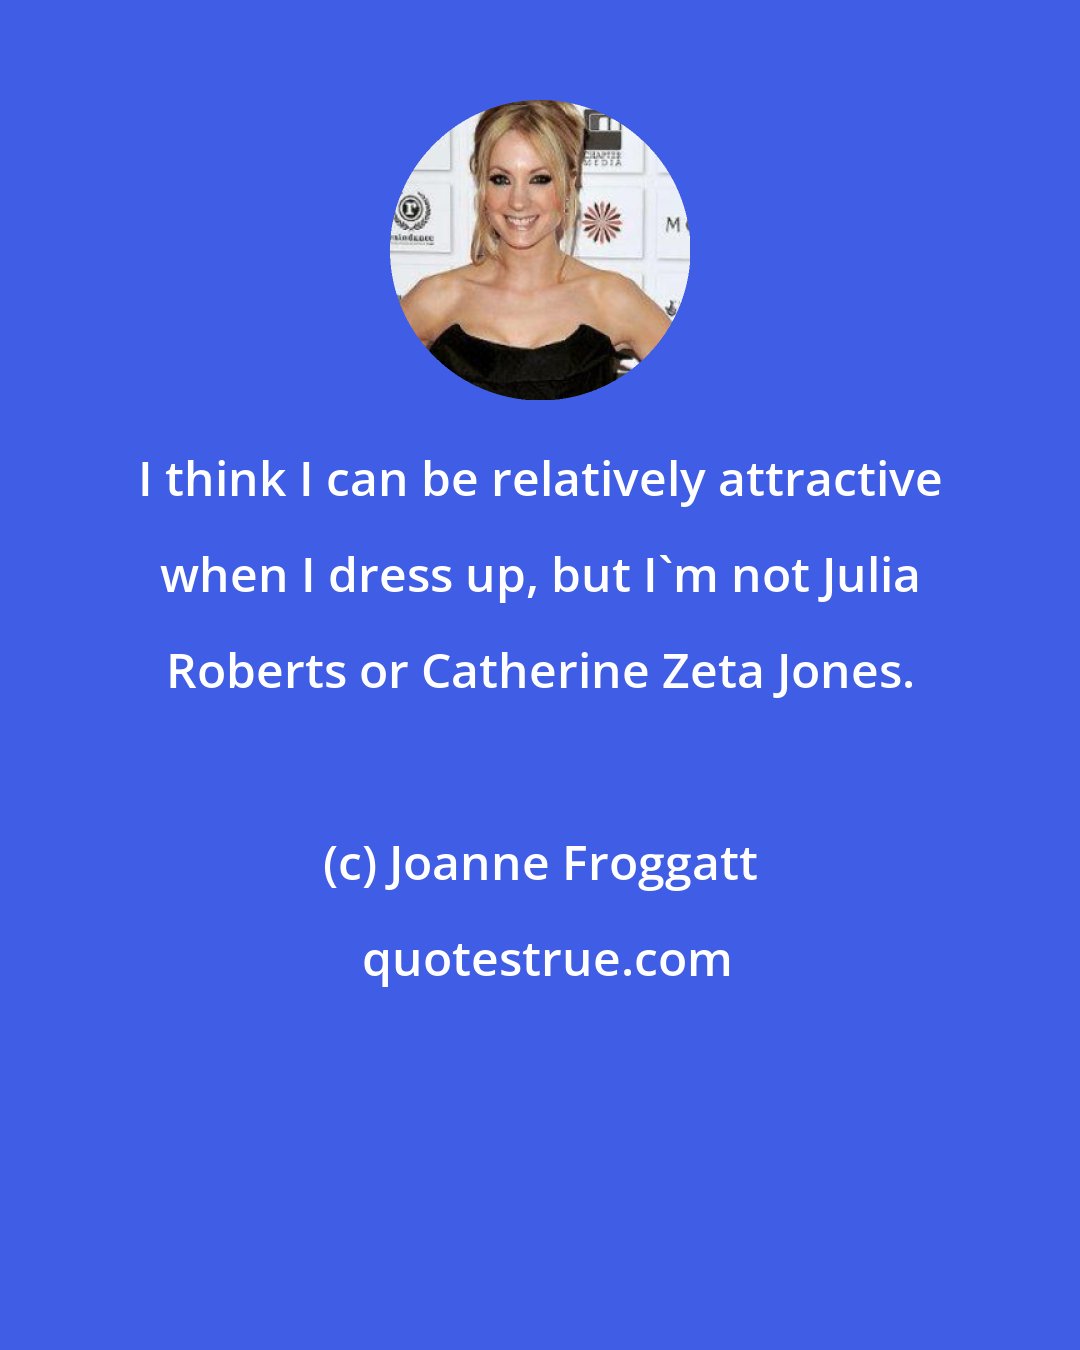 Joanne Froggatt: I think I can be relatively attractive when I dress up, but I'm not Julia Roberts or Catherine Zeta Jones.